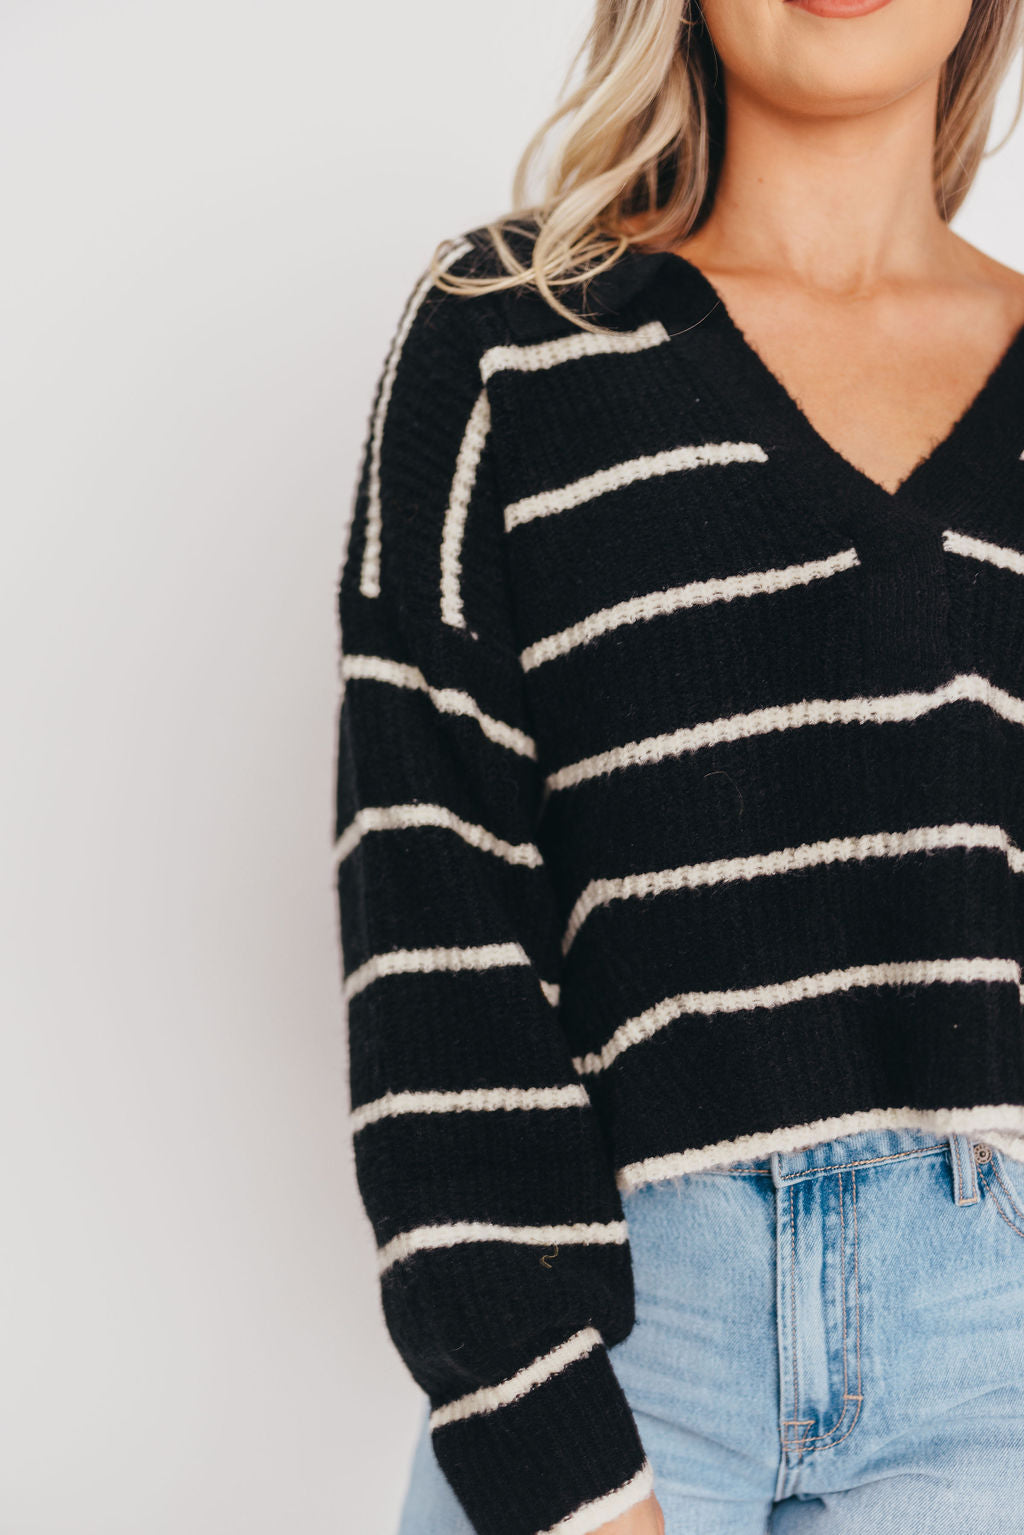 Holden Striped Collar Sweater in Black/Ivory